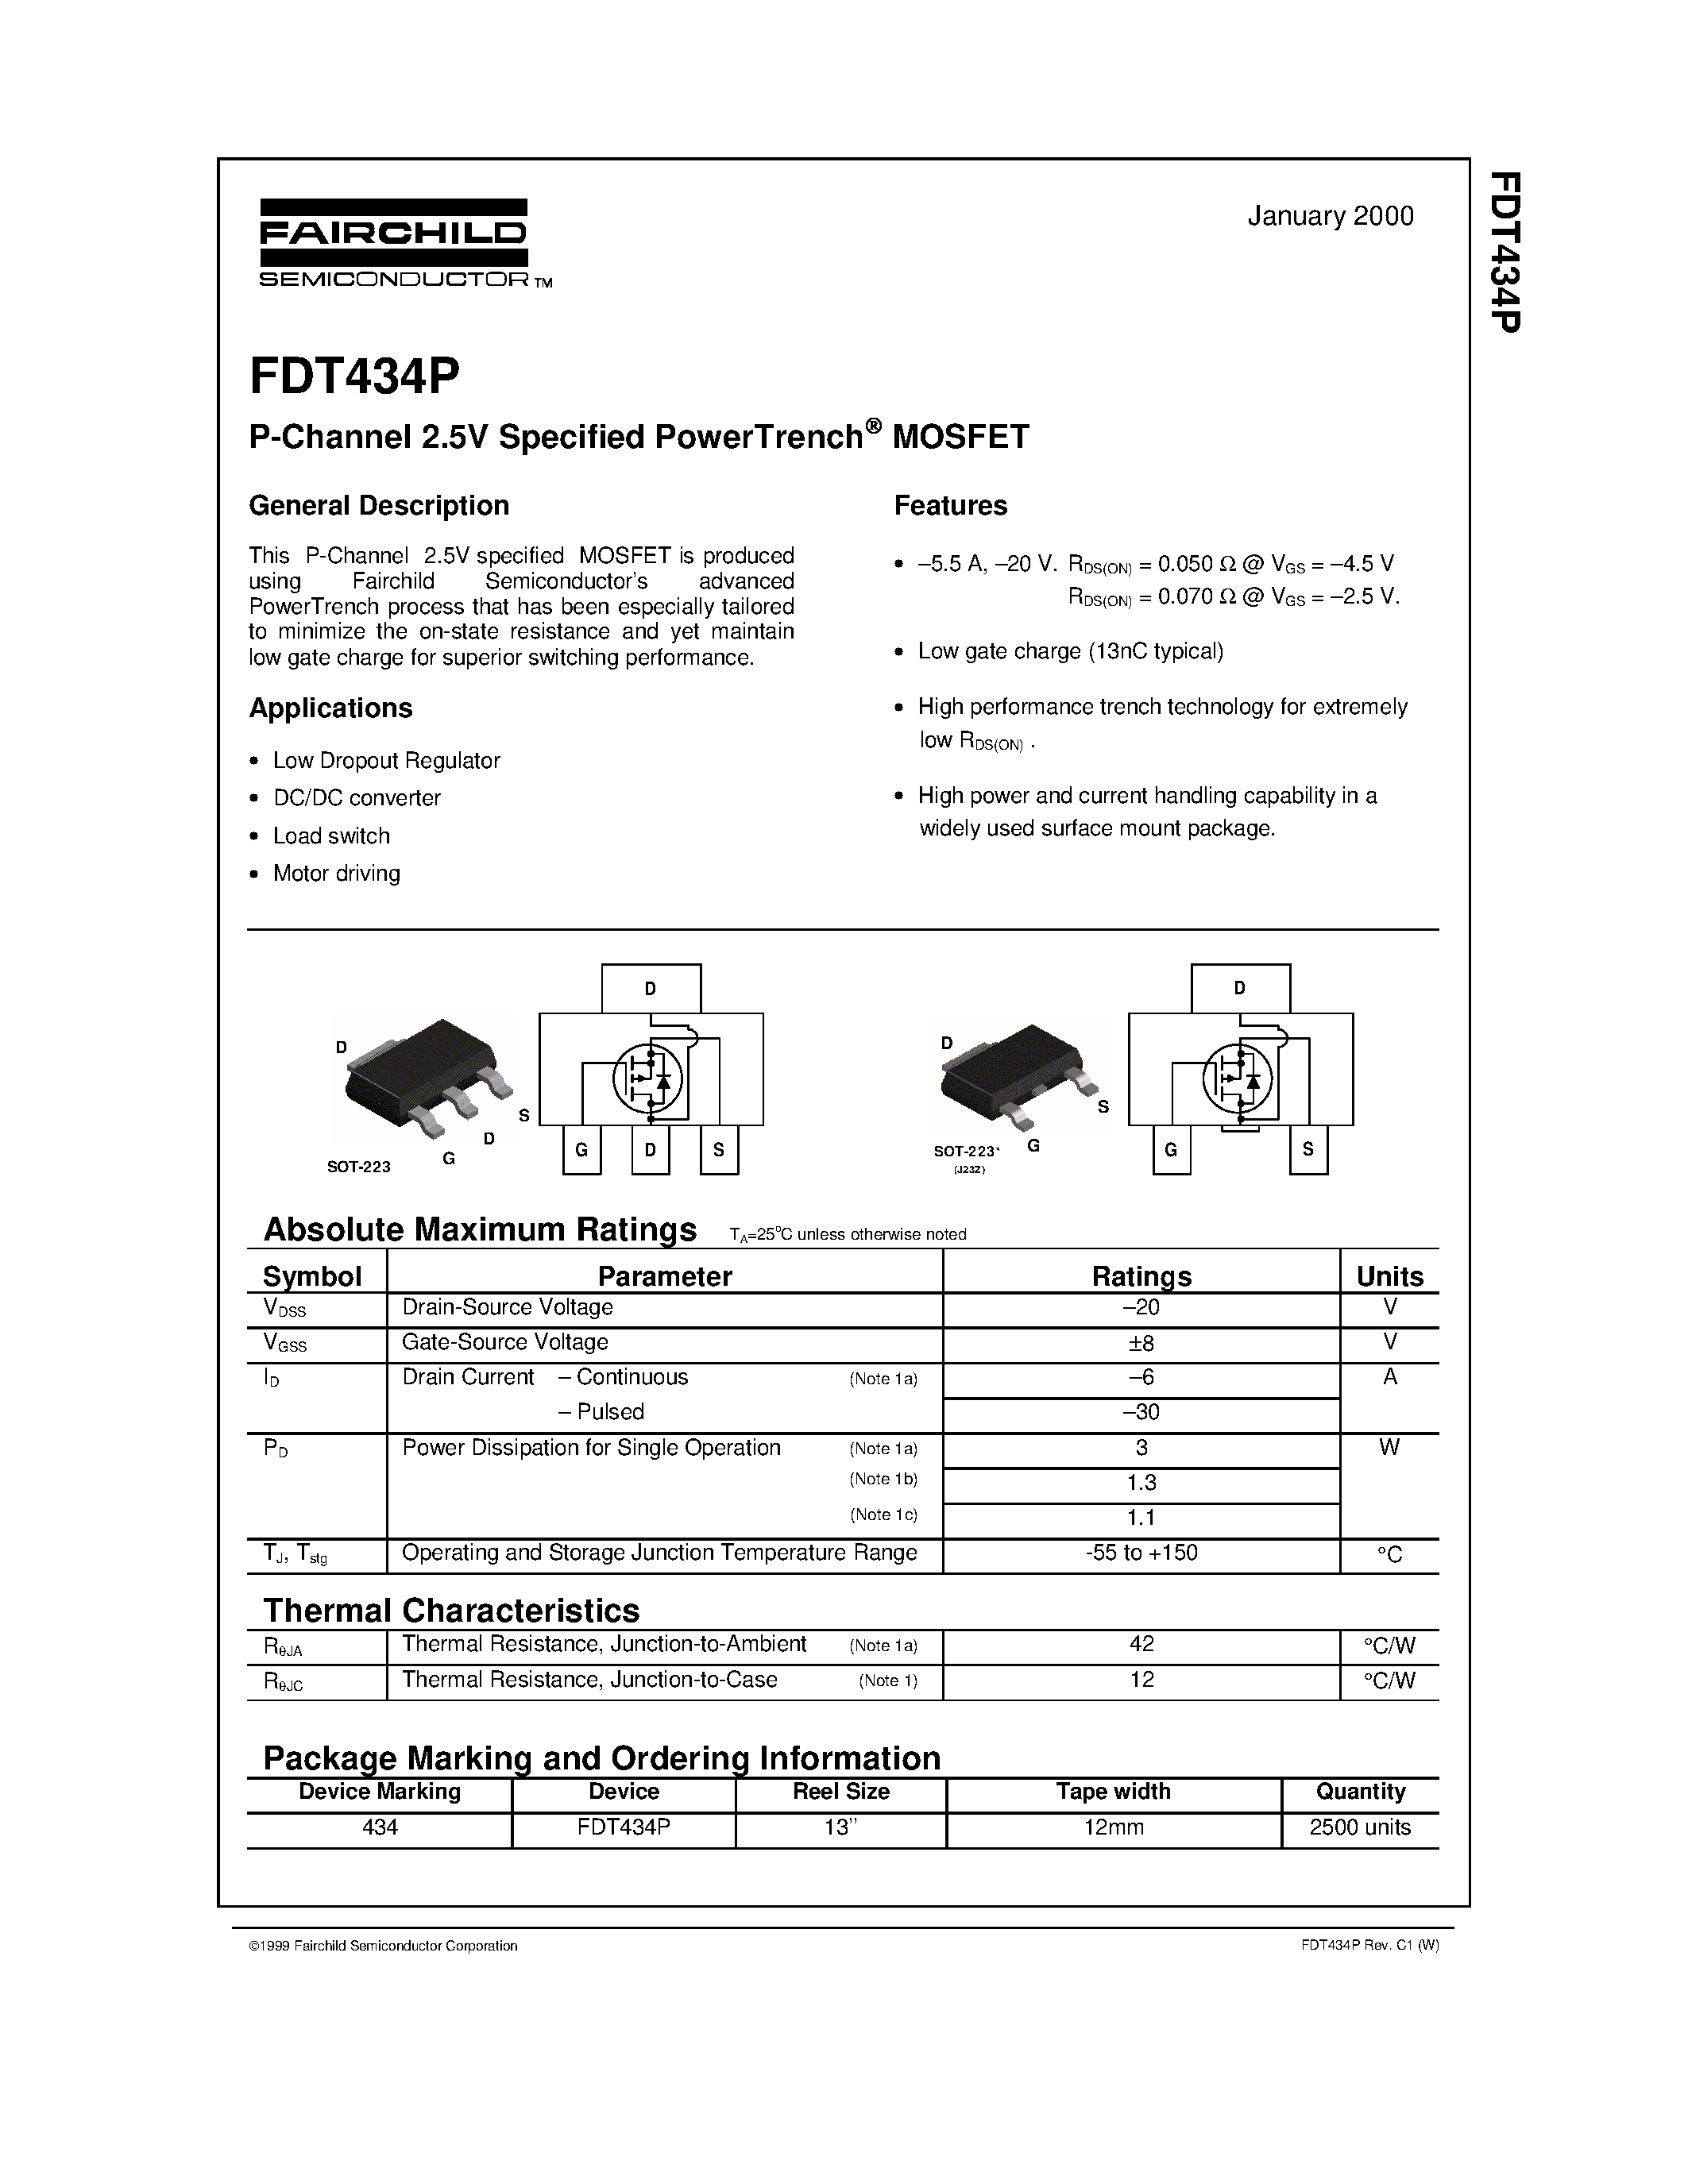 Даташит FDT434P-P-Channel 2.5V Specified PowerTrench MOSFET страница 1